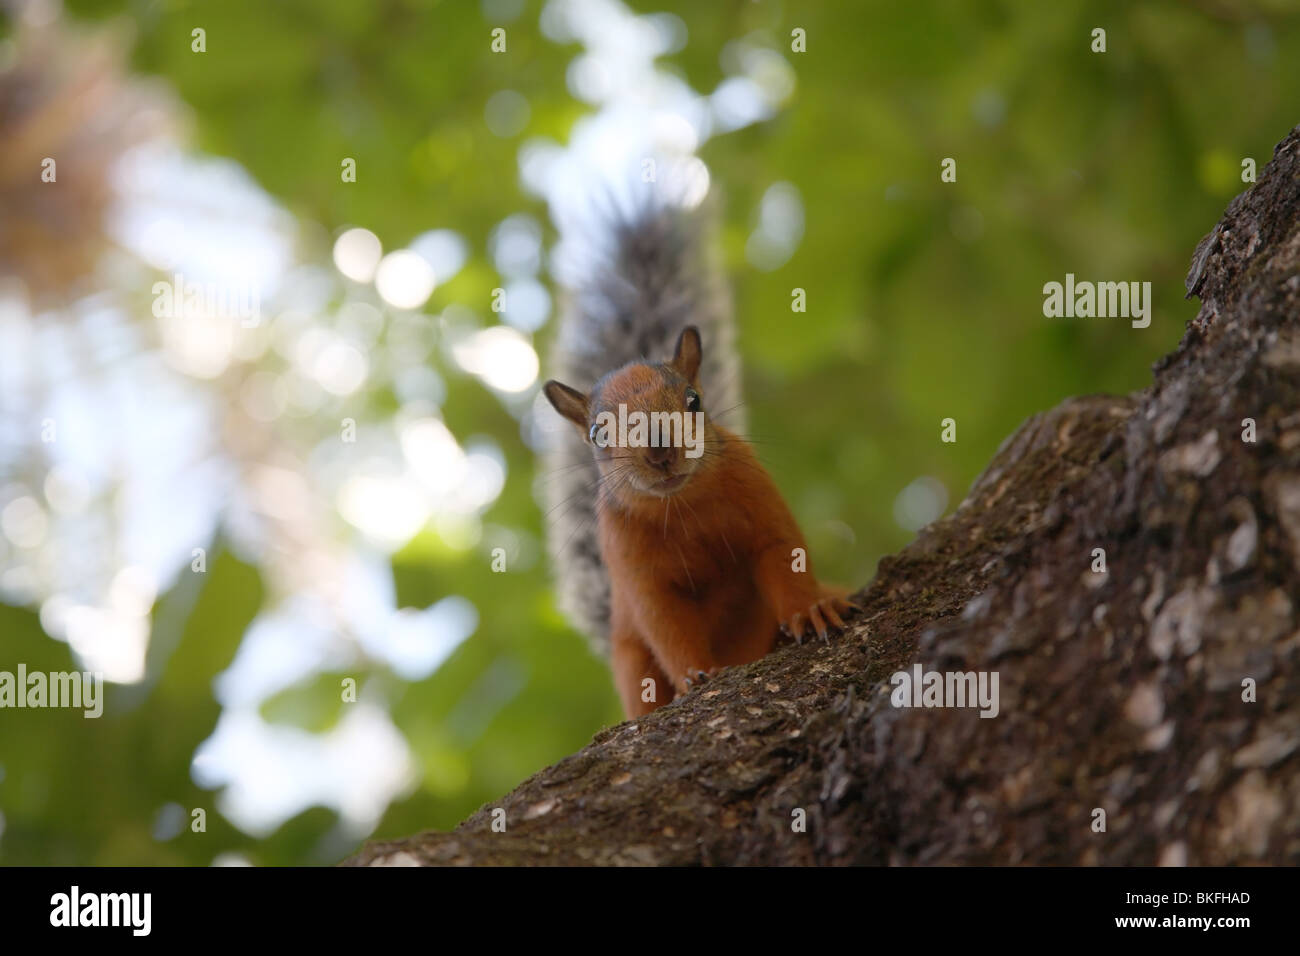 Red-tailed squirrel staring at the camera. Stock Photo